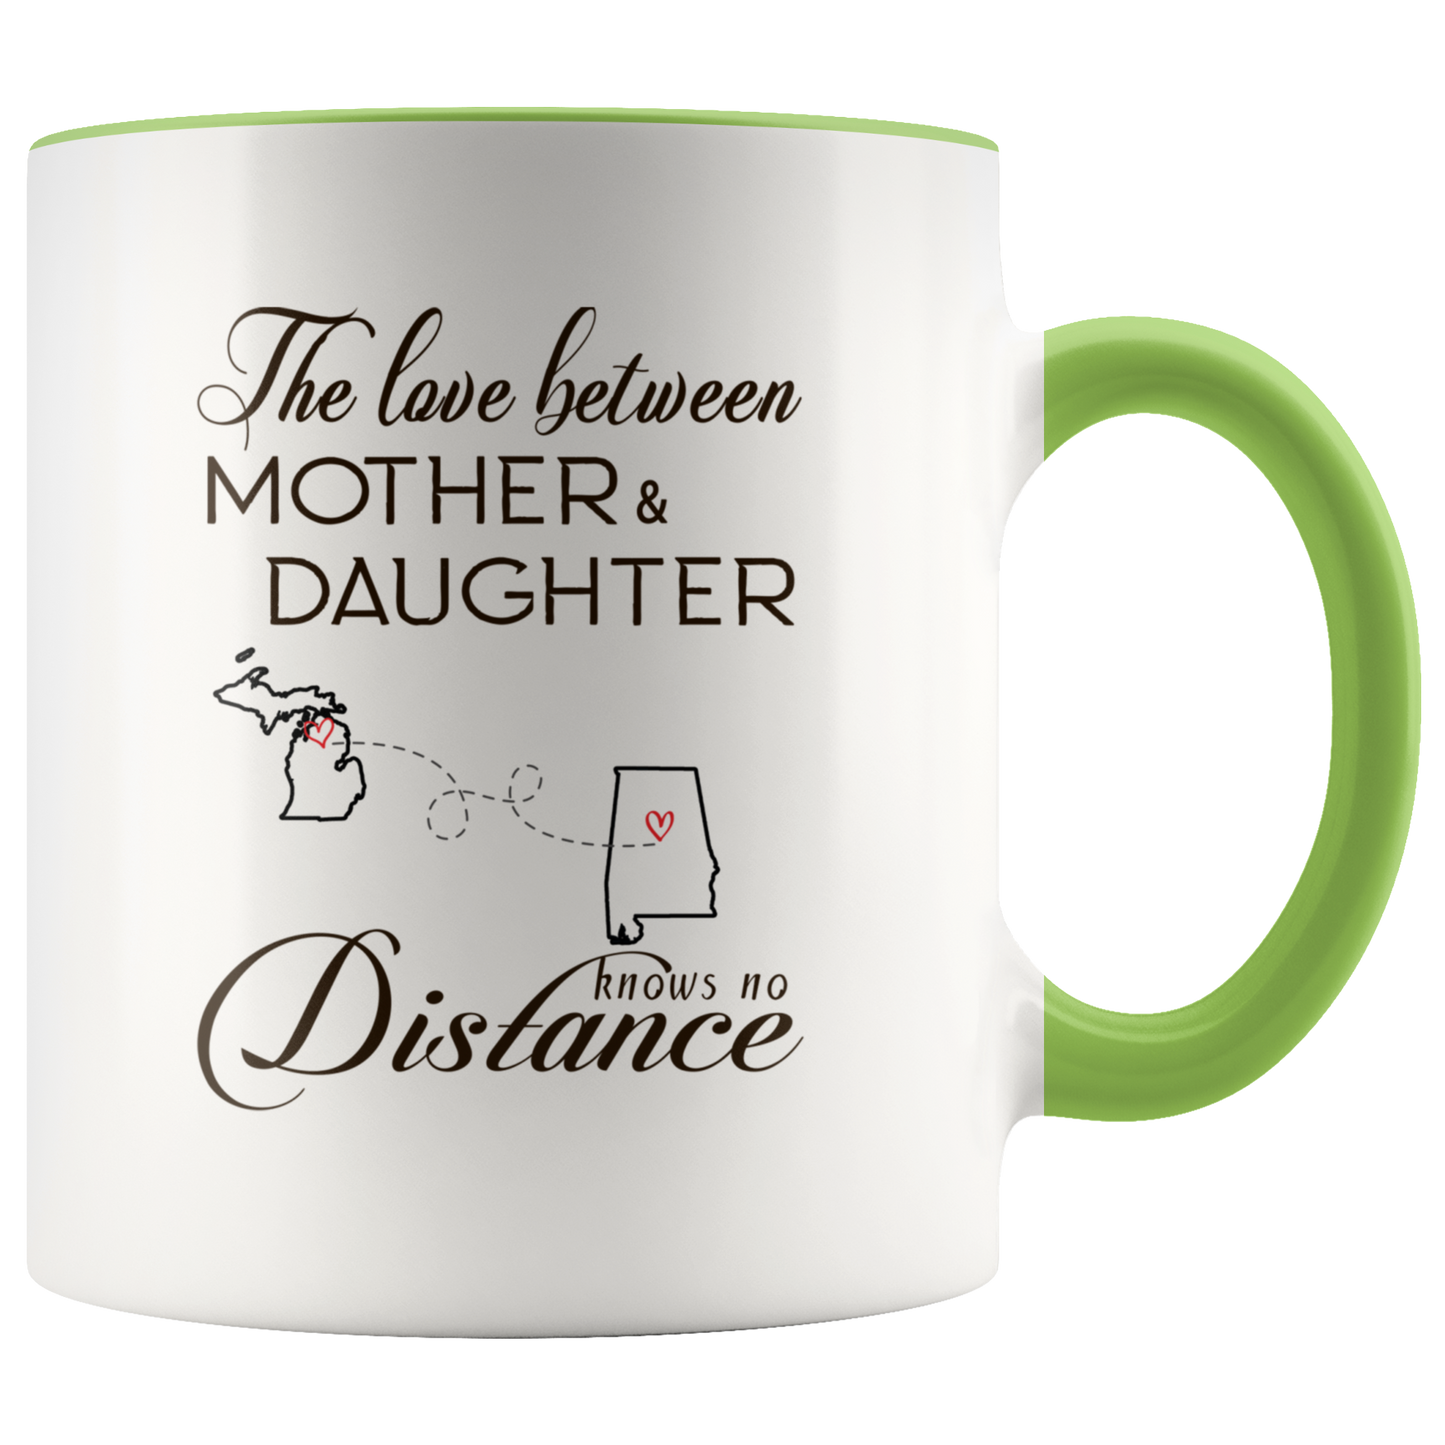 ND-21334603-sp-23848 - [ Michigan | Alabama ]Long Distance Accent Mug 11 oz Red - The Love Between Mother